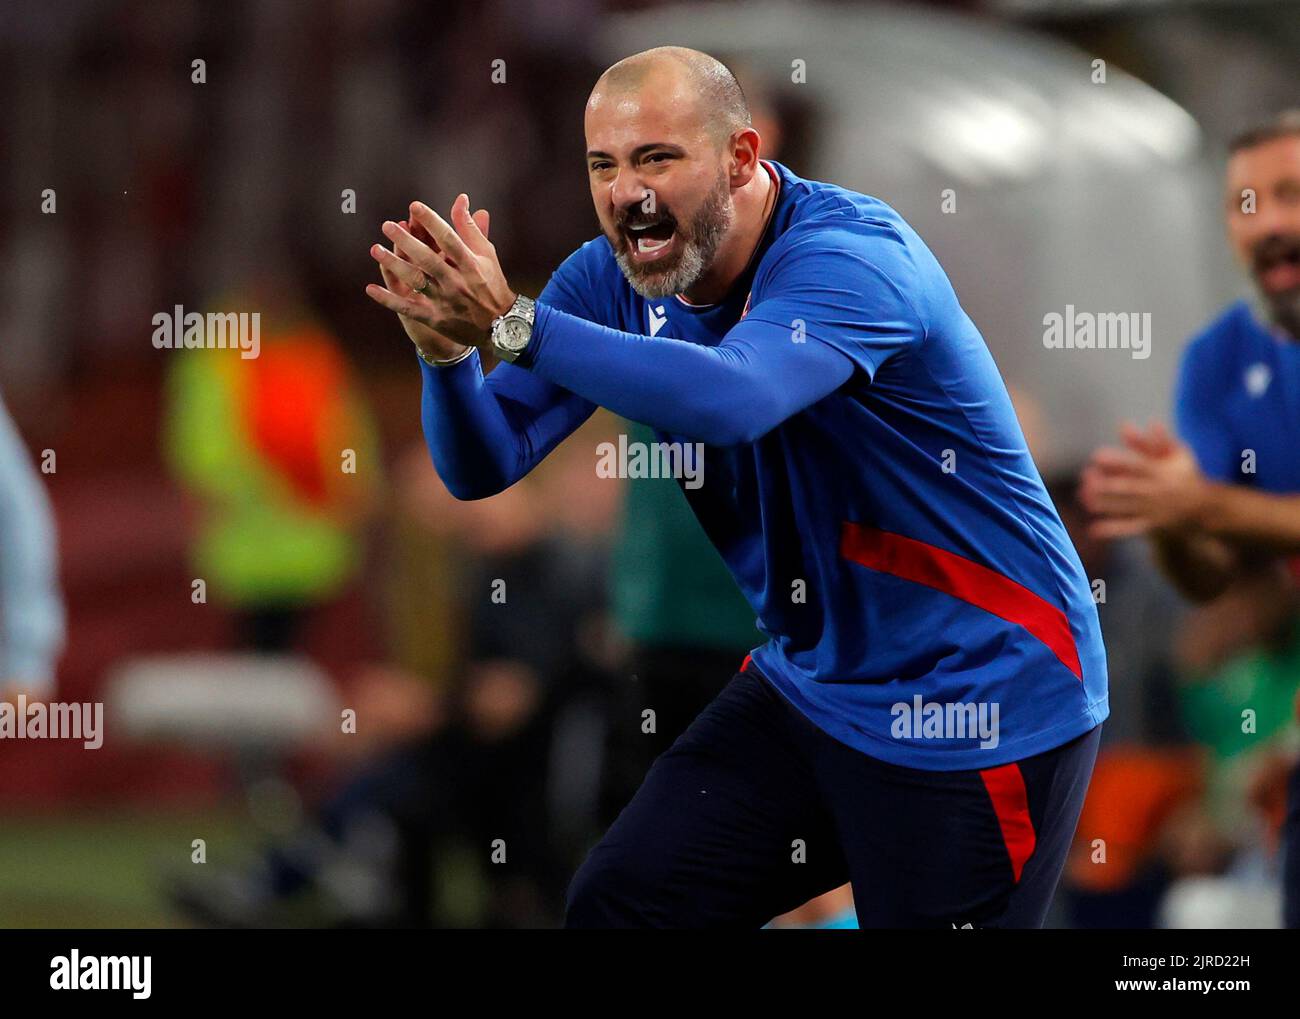 Dejan Stankovic Head coach of FK Crvena zvezda reacts during the UEFA  Europa League match at Giuseppe Meazza, Milan. Picture date: 25th February  2021. Picture credit should read: Jonathan Moscrop/Sportimage via PA